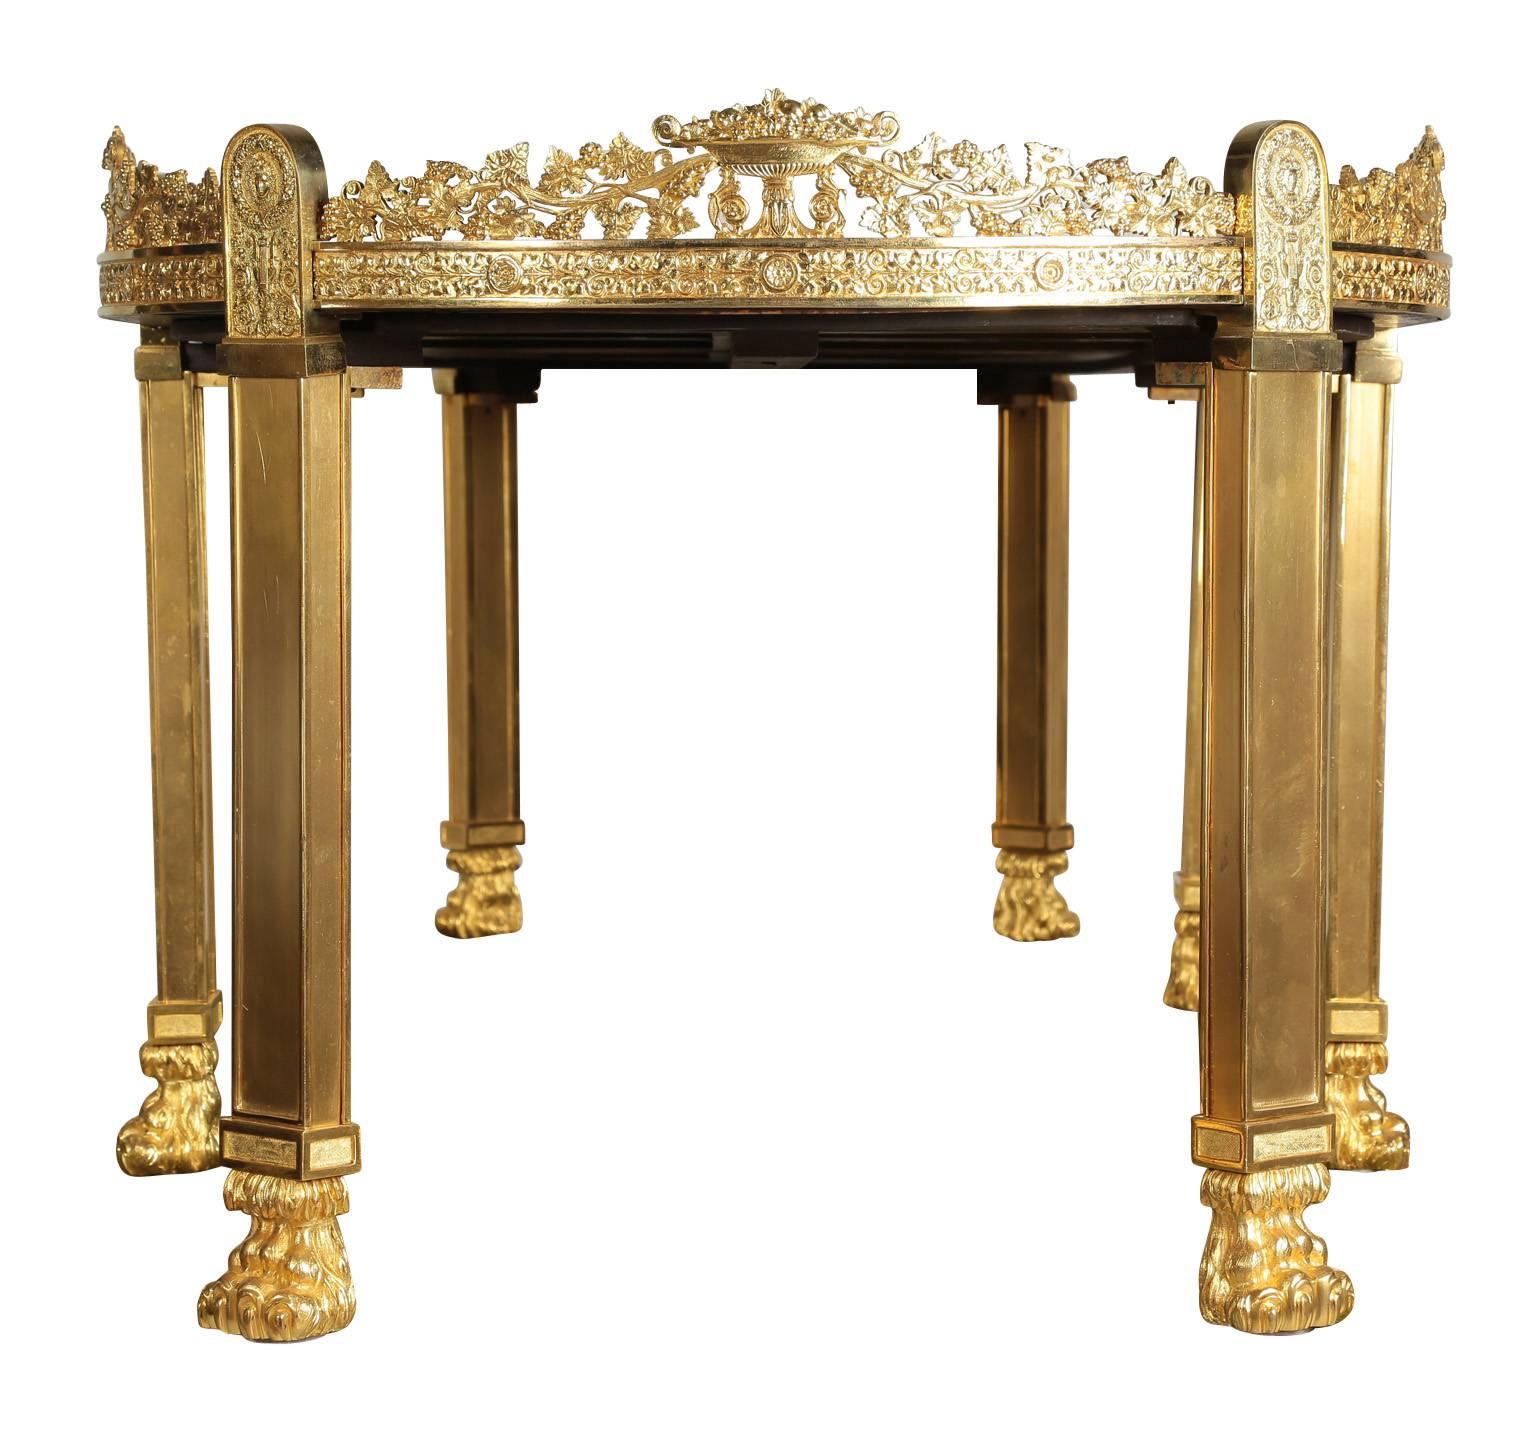 19th Century Large French Empire Style Napoleon III Gilt-Bronze Surtout-de-table Coffee Table For Sale